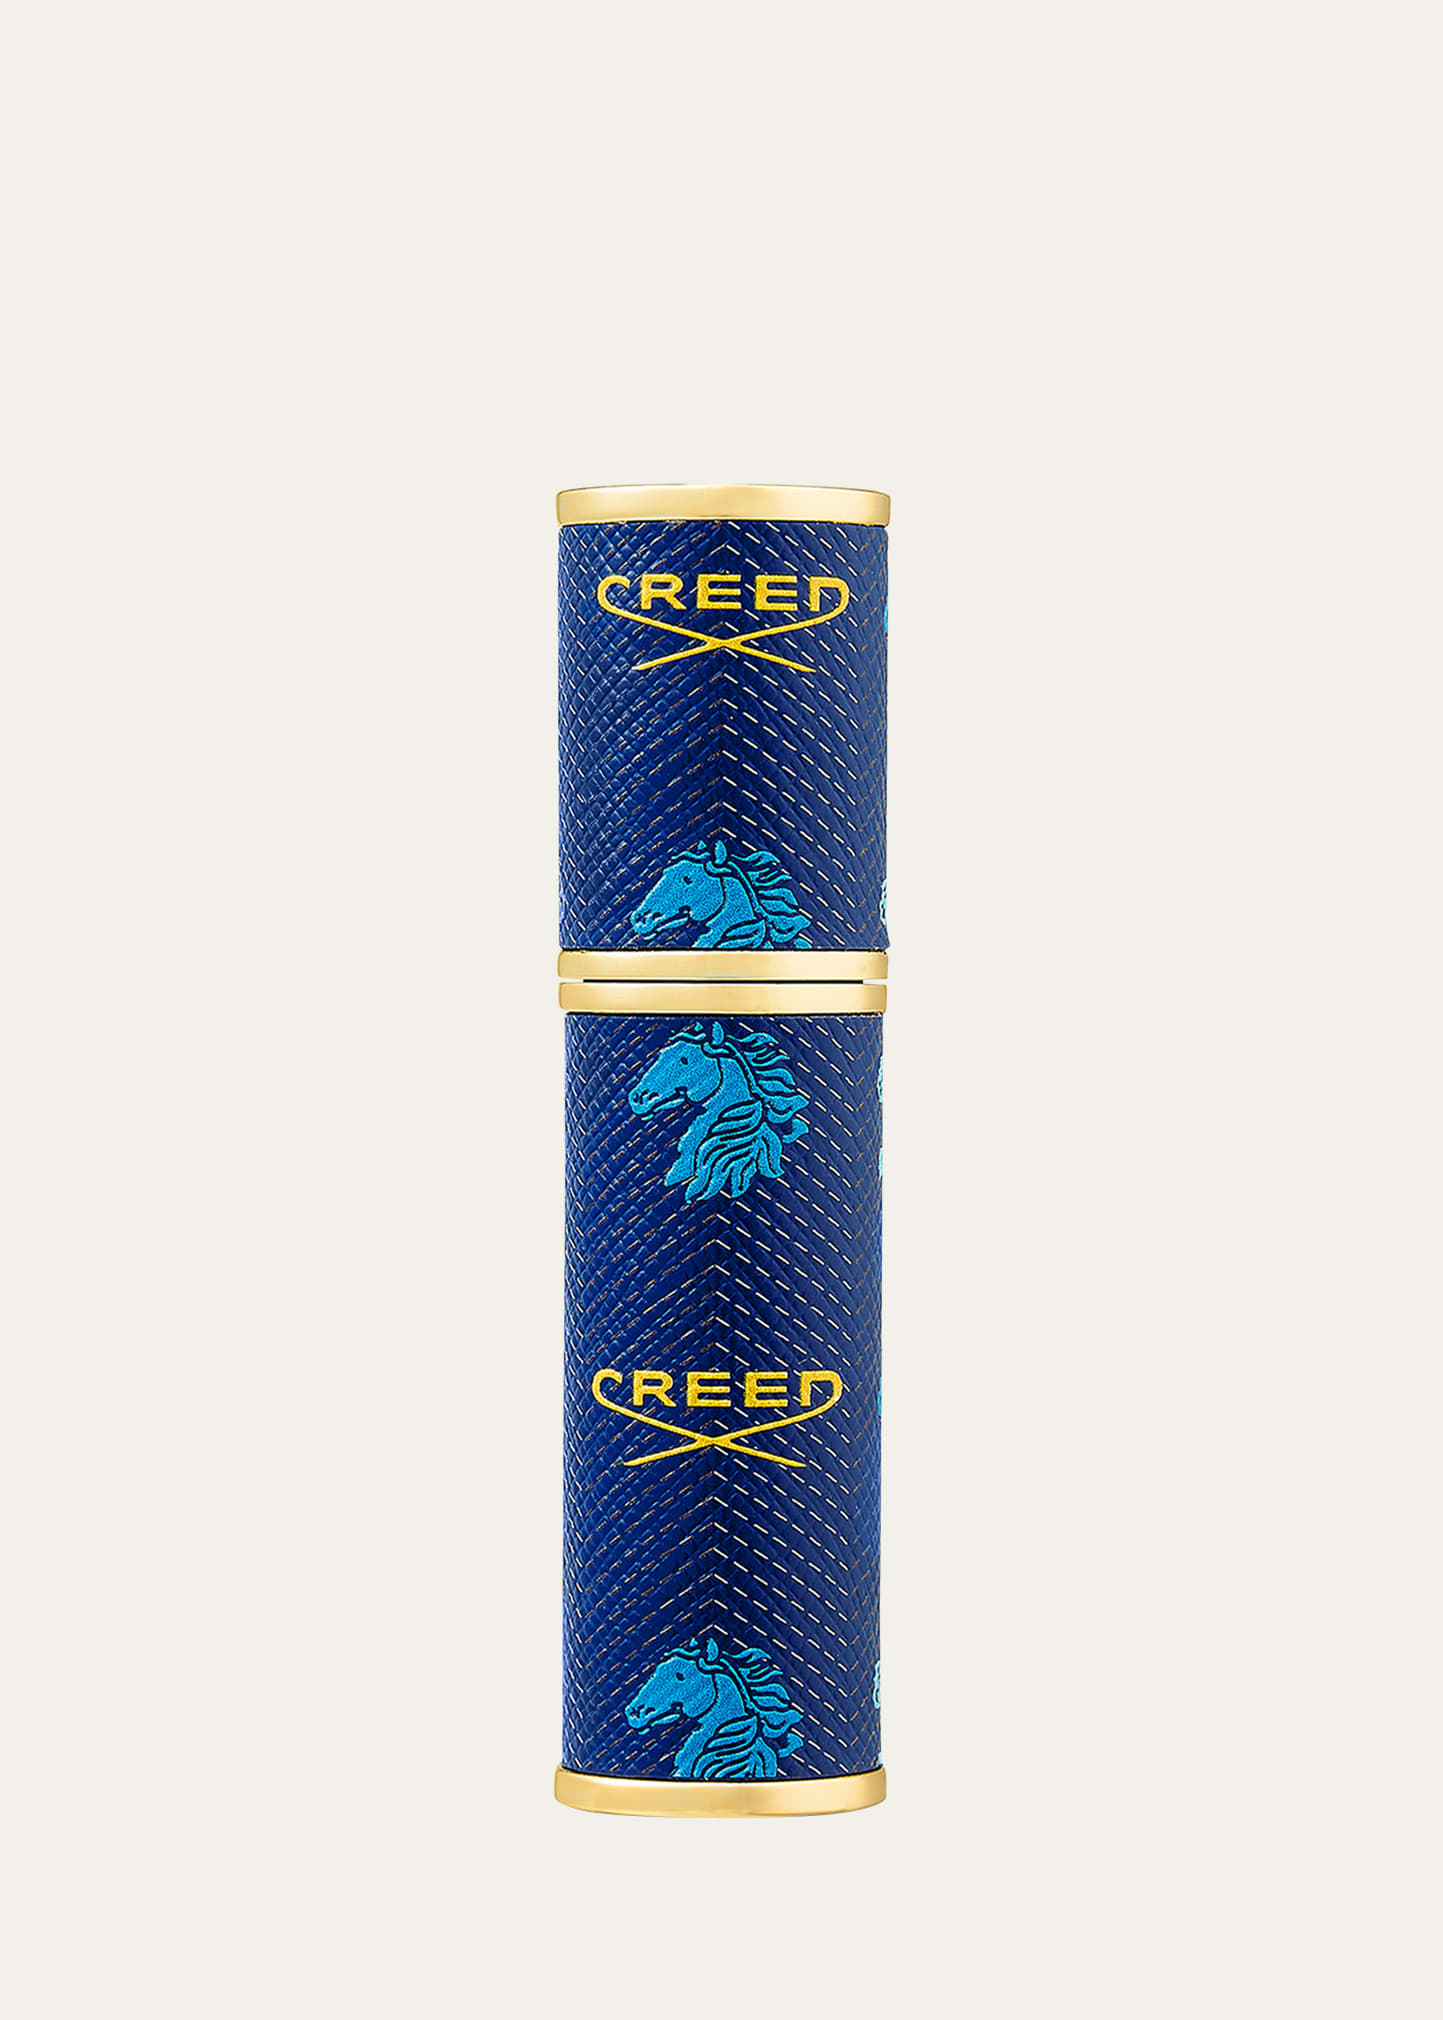 Creed Blue Leather Travel Spray Atomizer